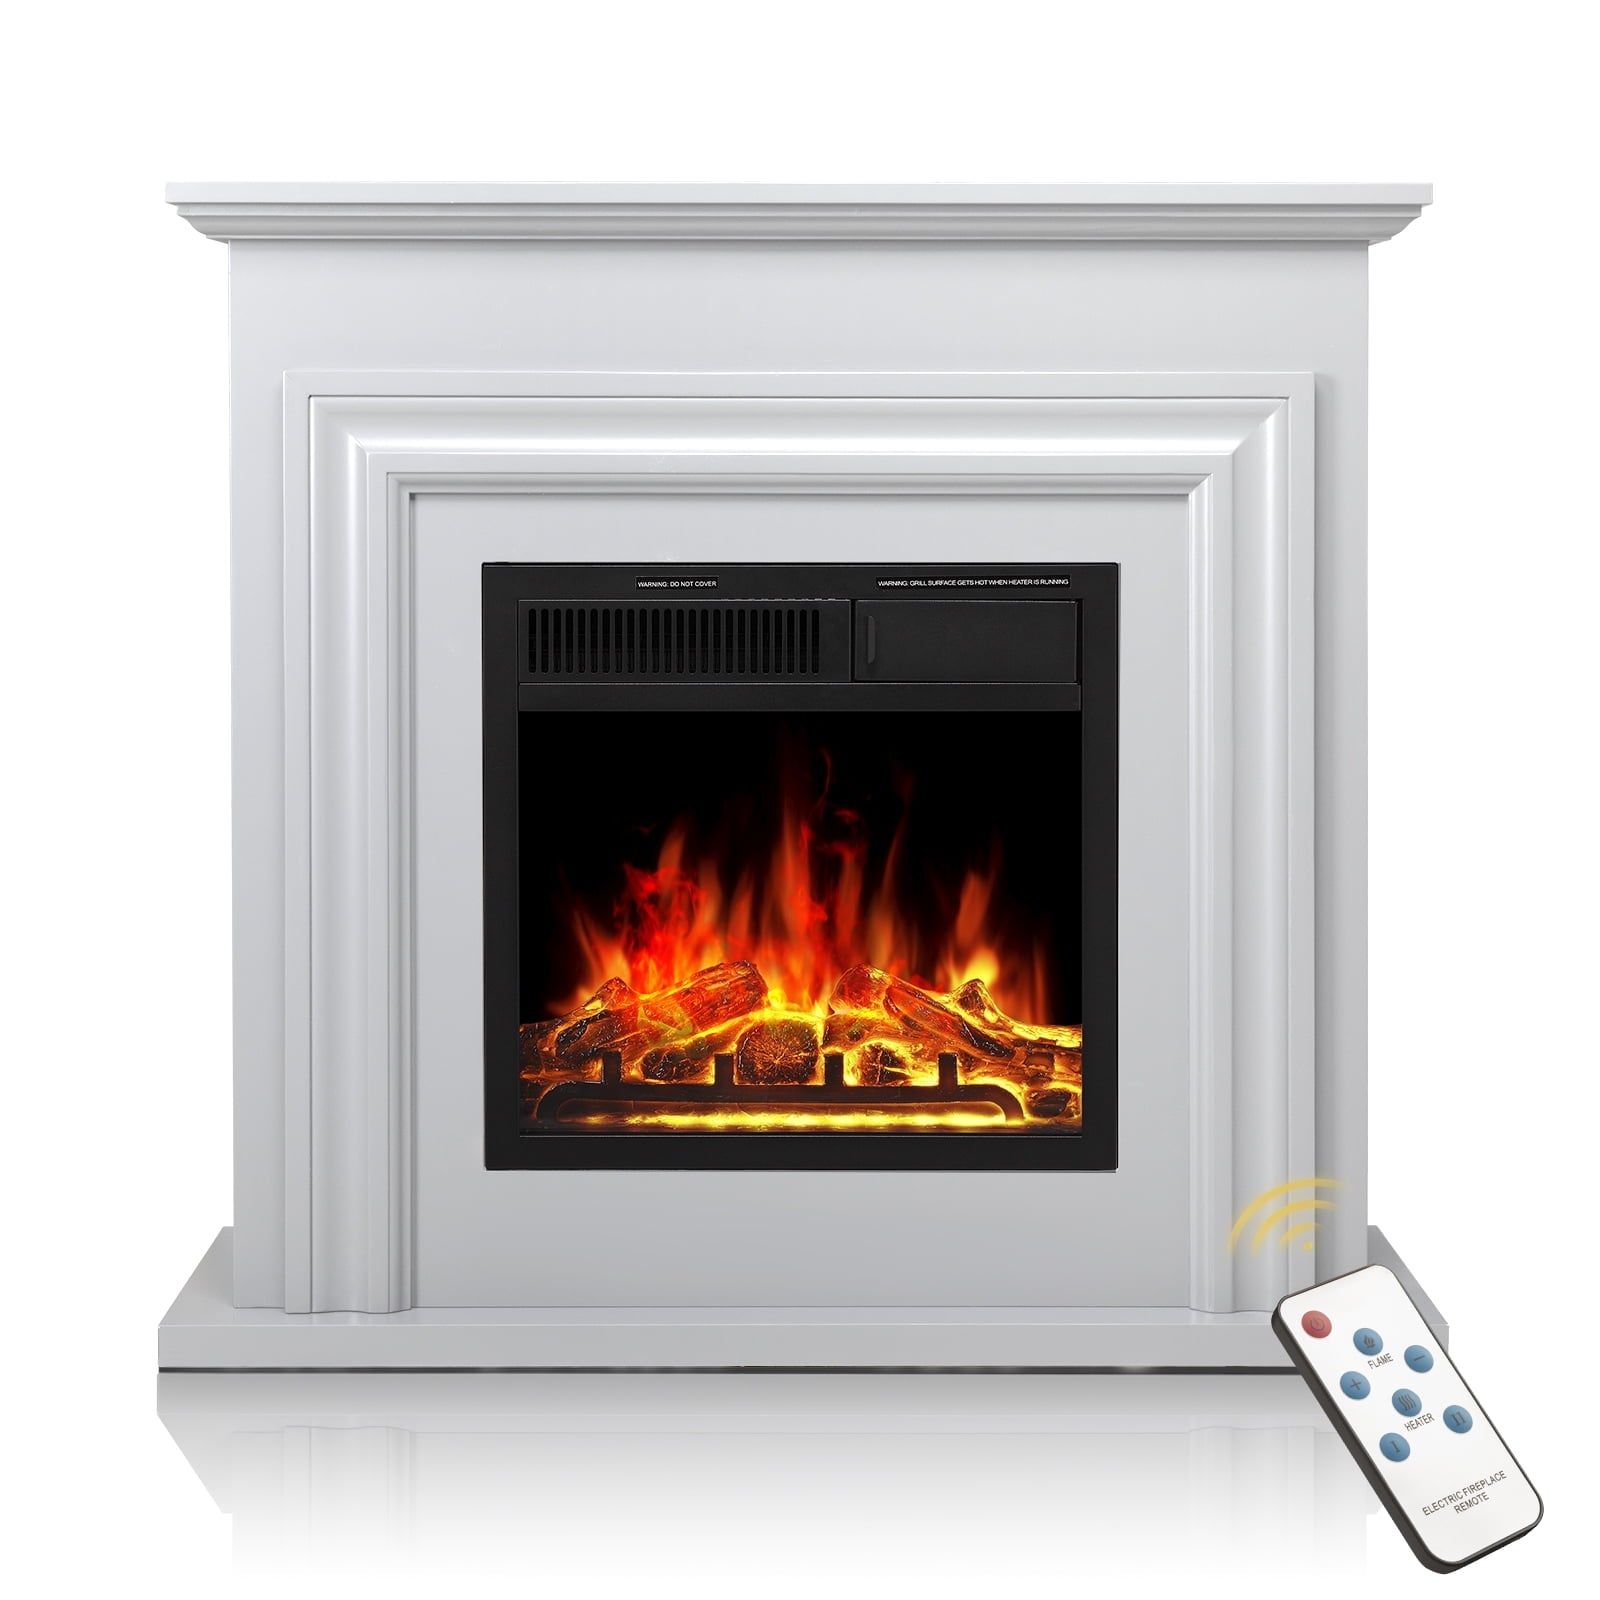 KISSAIR Electric Fireplace with Mantel Package Freestanding Fireplace Heater Corner Firebox with Log & Remote Control, 750-1500W, Lvory White